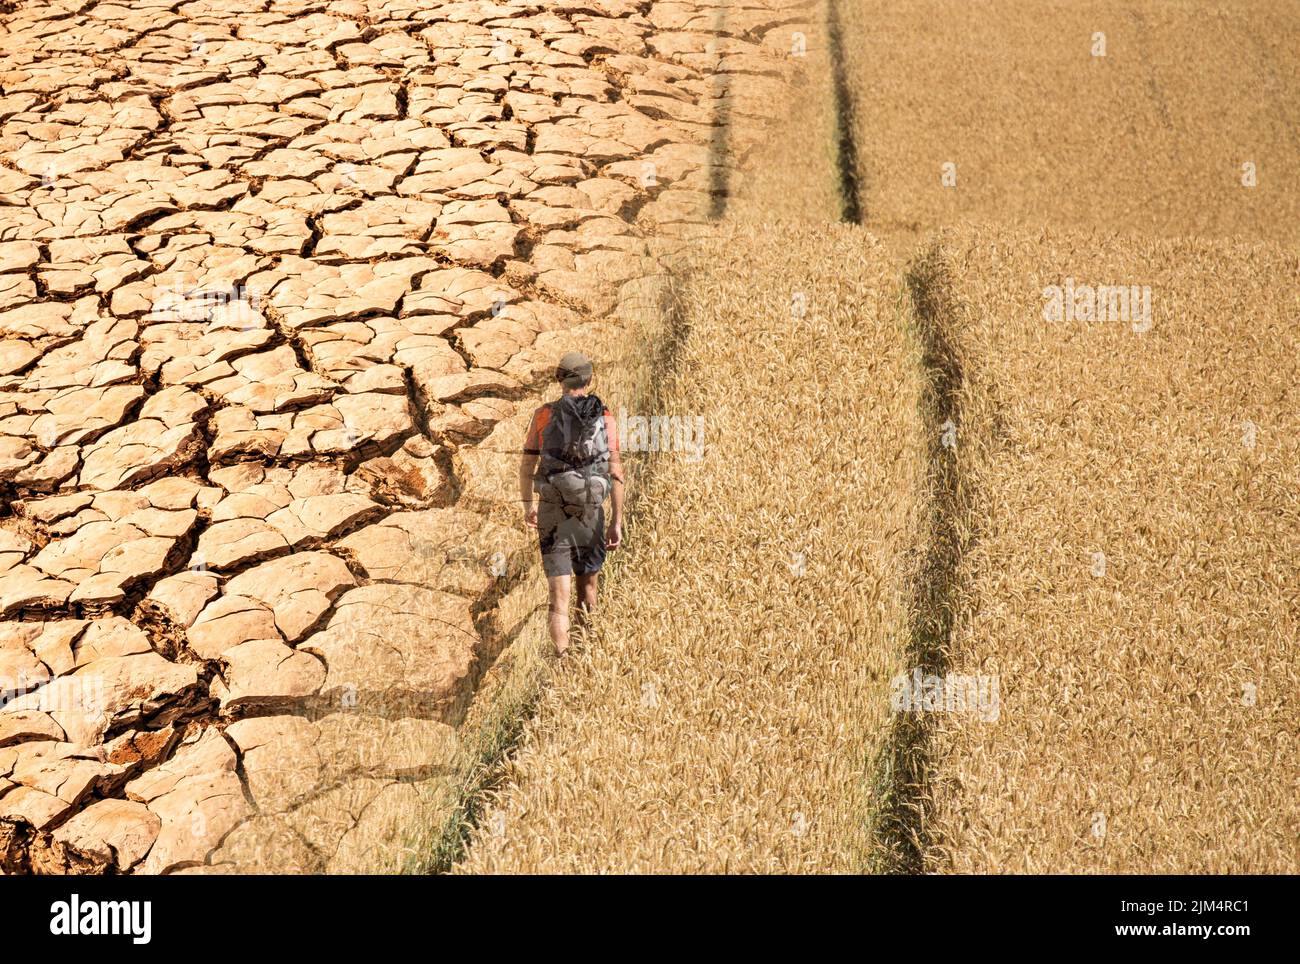 Global warming concept: man walking through wheat field with dried, cracked earth image overlayed. Stock Photo